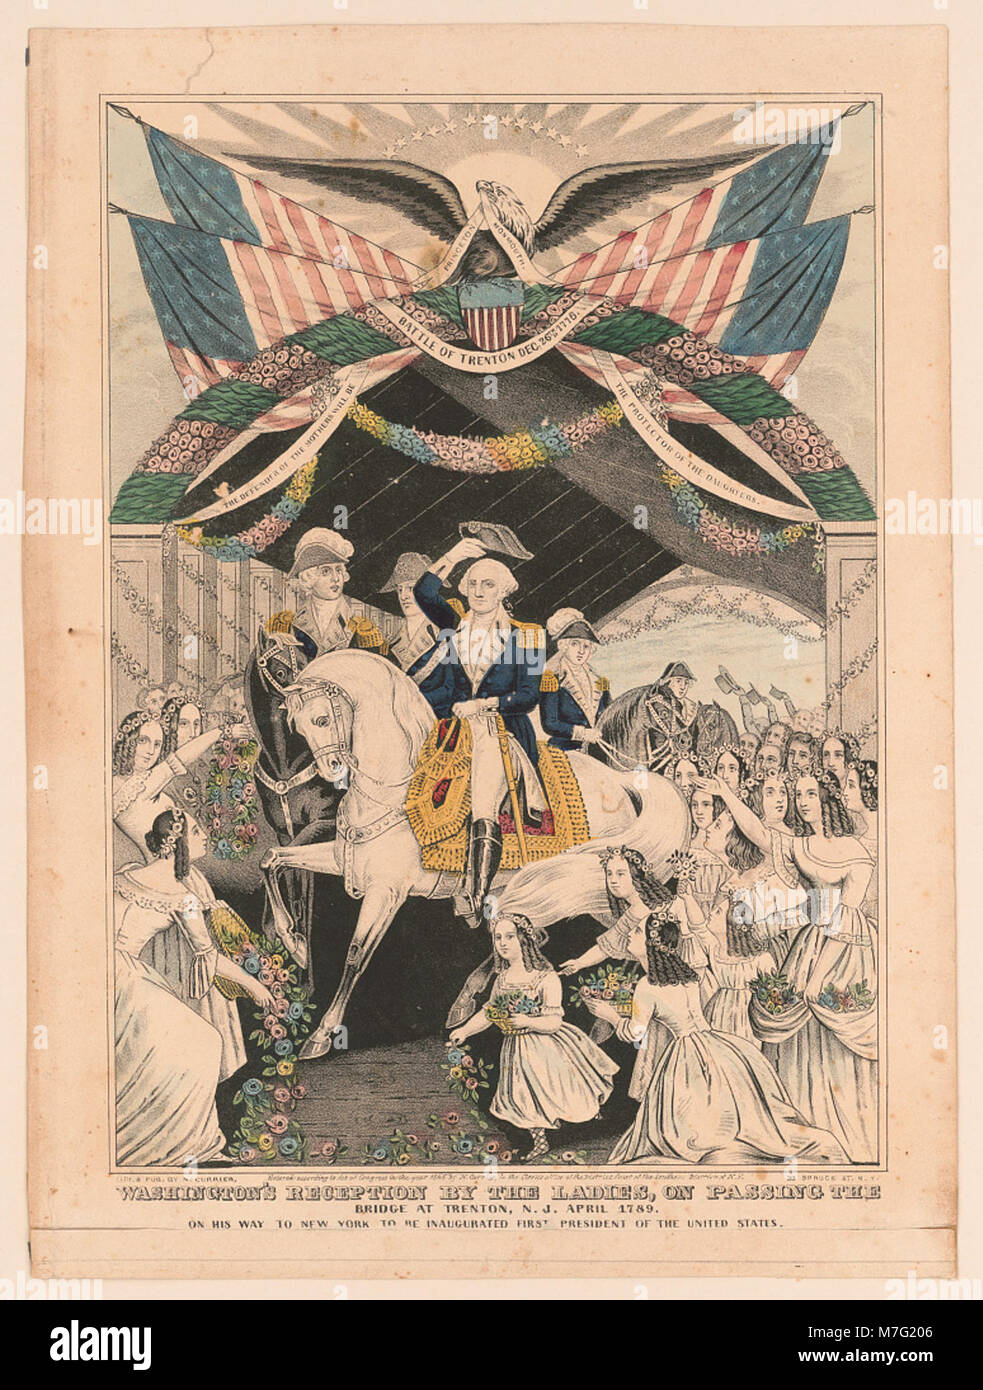 Washington's reception by the ladies, on passing the bridge at Trenton, N.J. April, 1789- on his way to New York to be inaugurated first President of the United States LCCN2002698181 Stock Photo